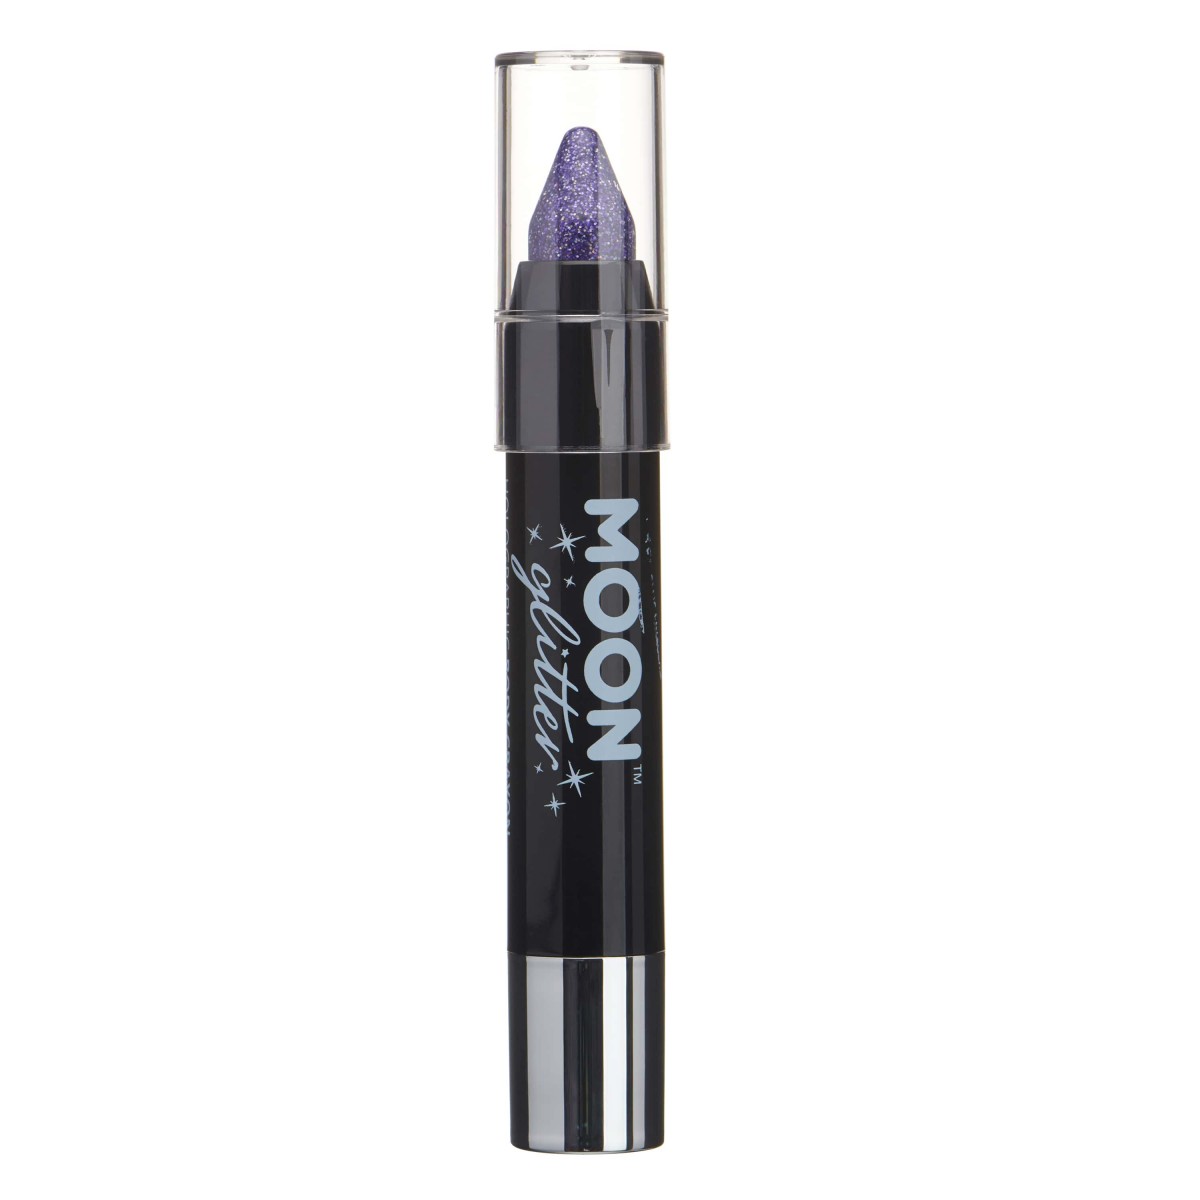 MOON CREATIONS G2 HOLOGRAPHIC GLITTER FACE & BODY CRAYON PURPLE 3.2g